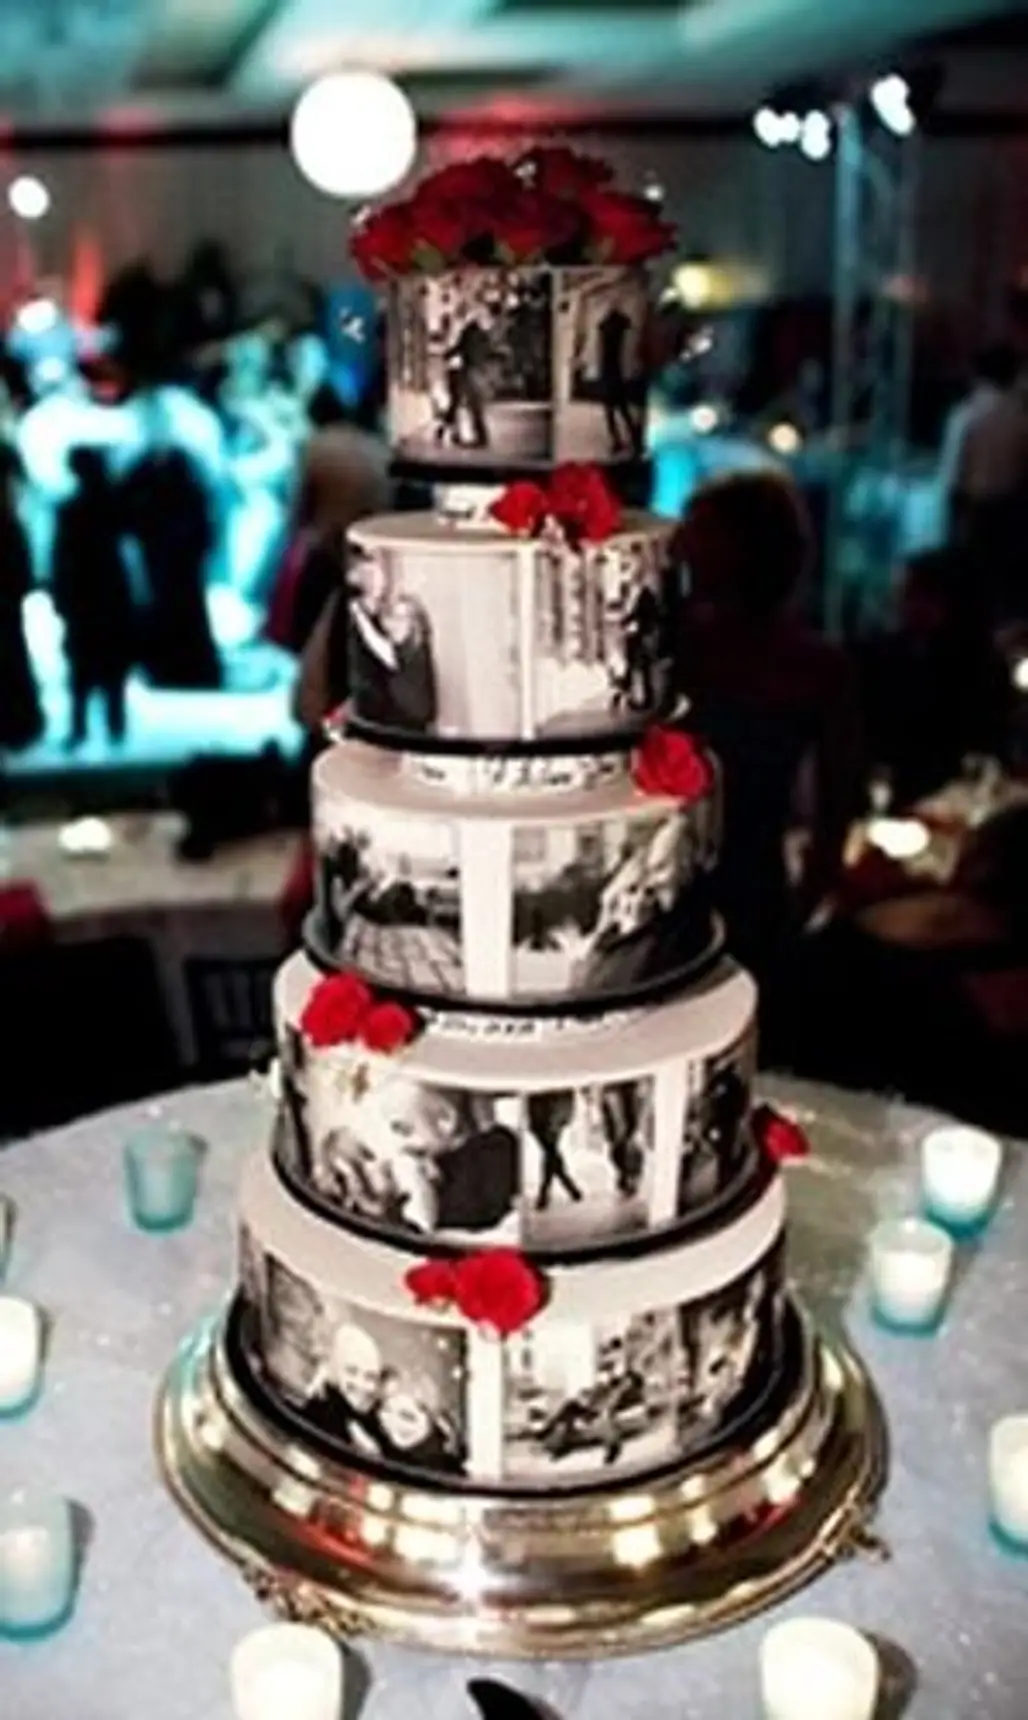 Wedding Cake with Engagement Pictures